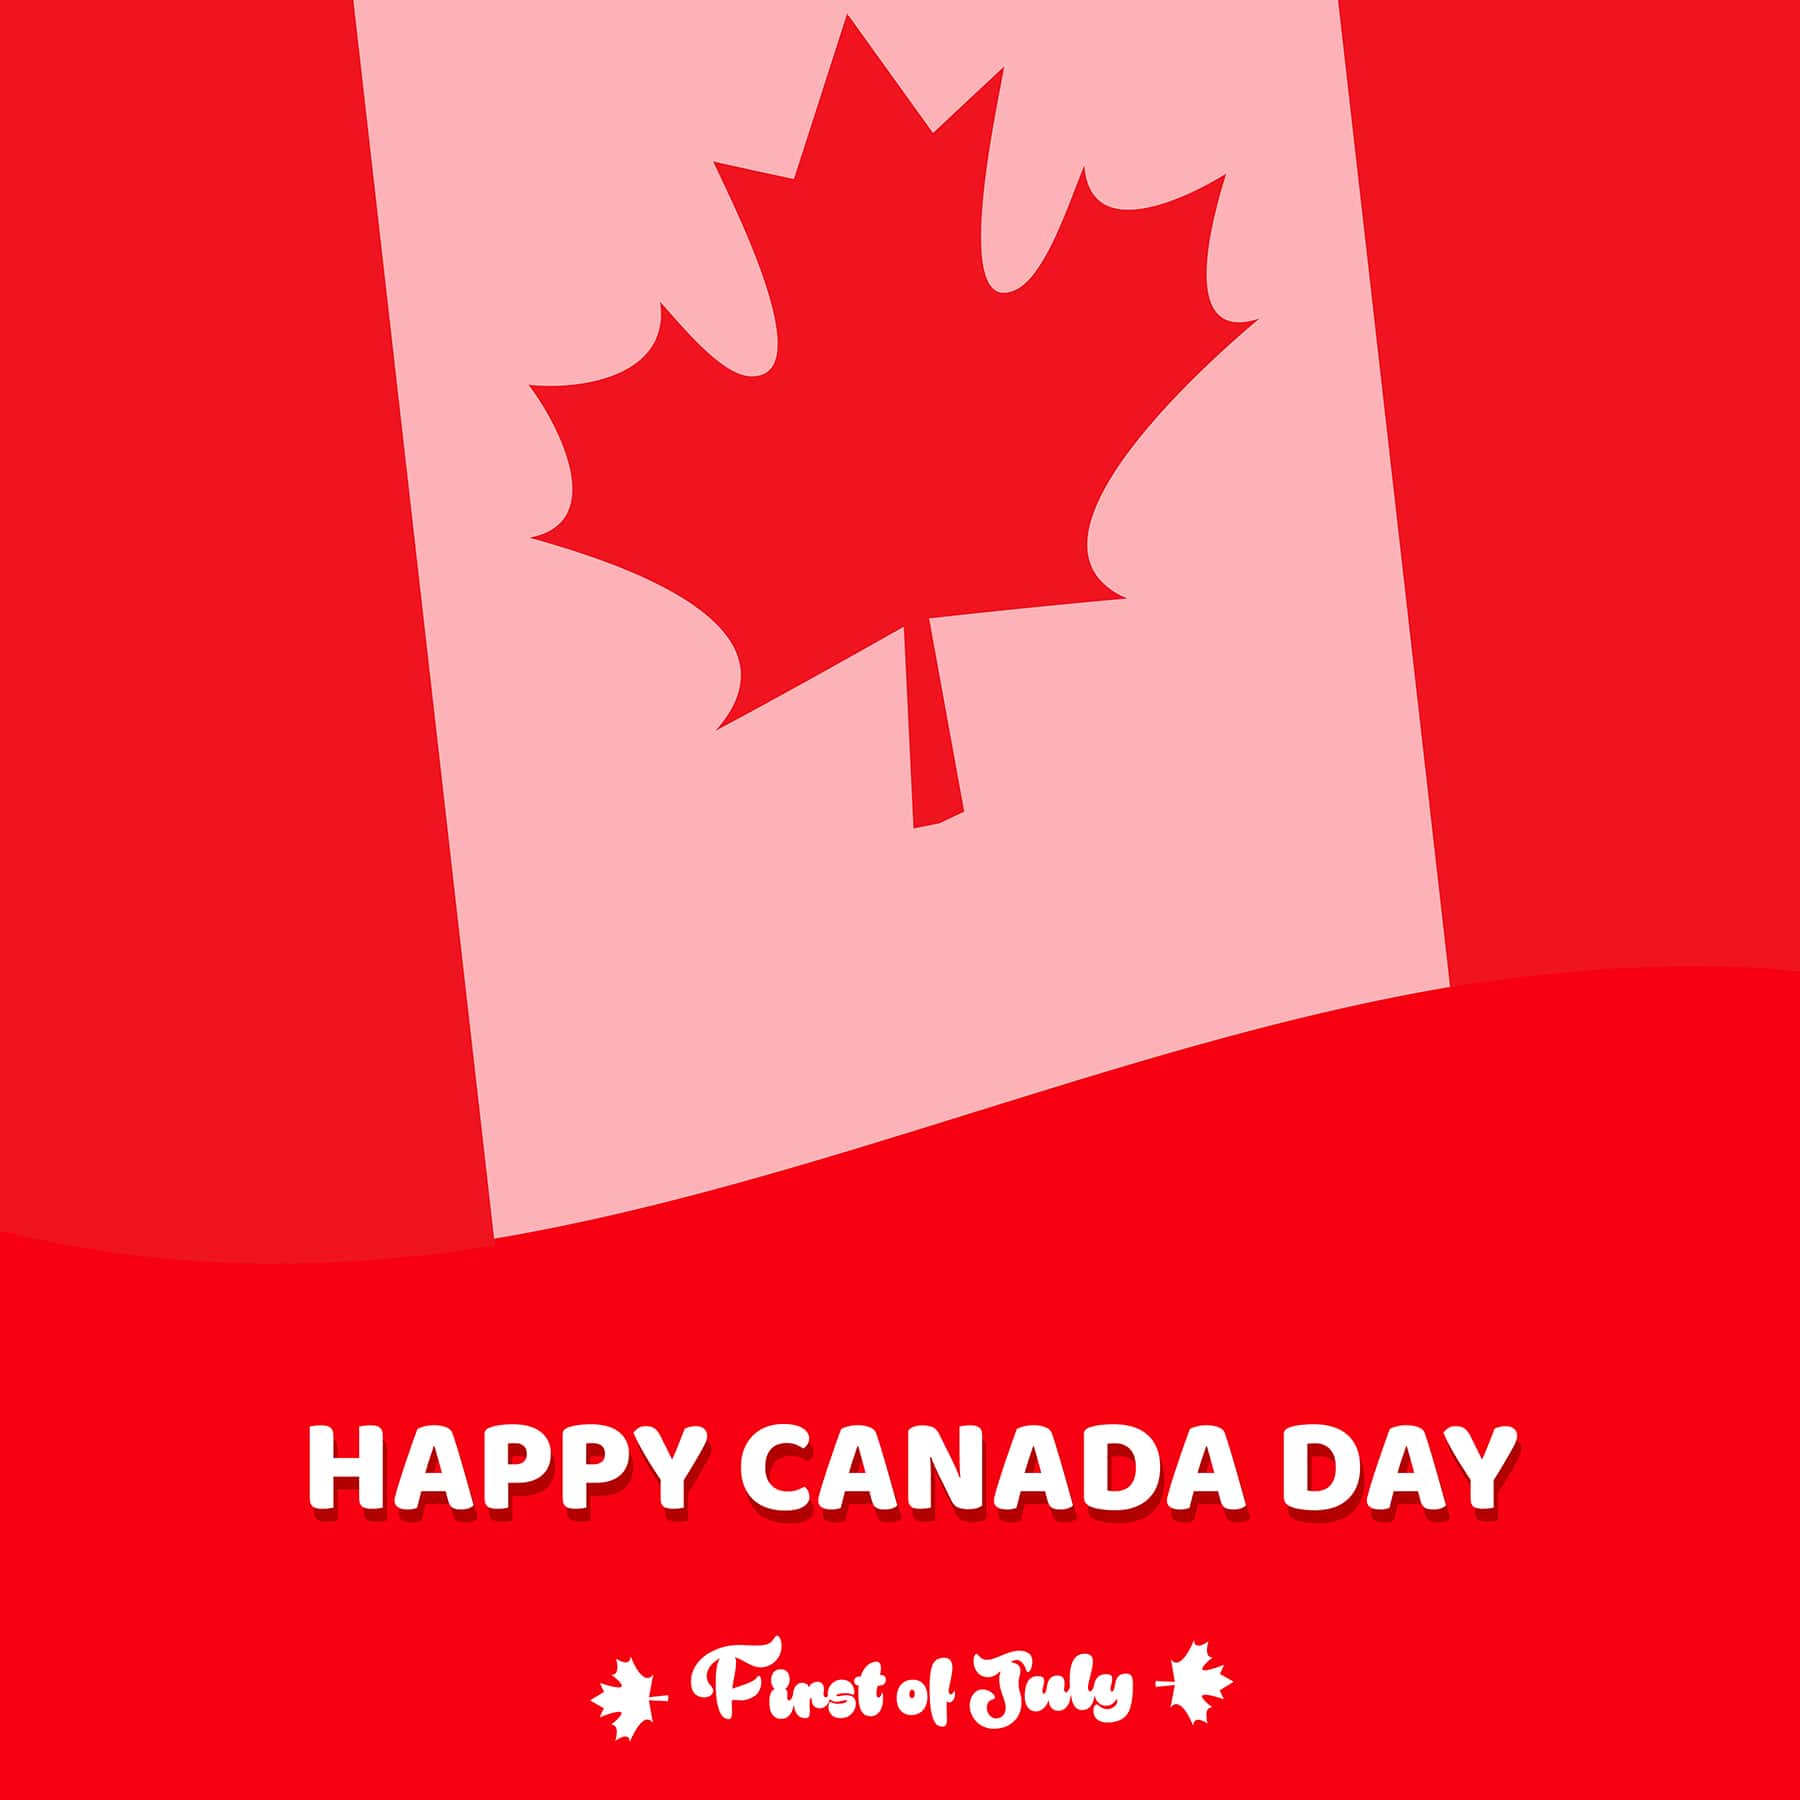 Happy Canada Day vector design with flag background free download